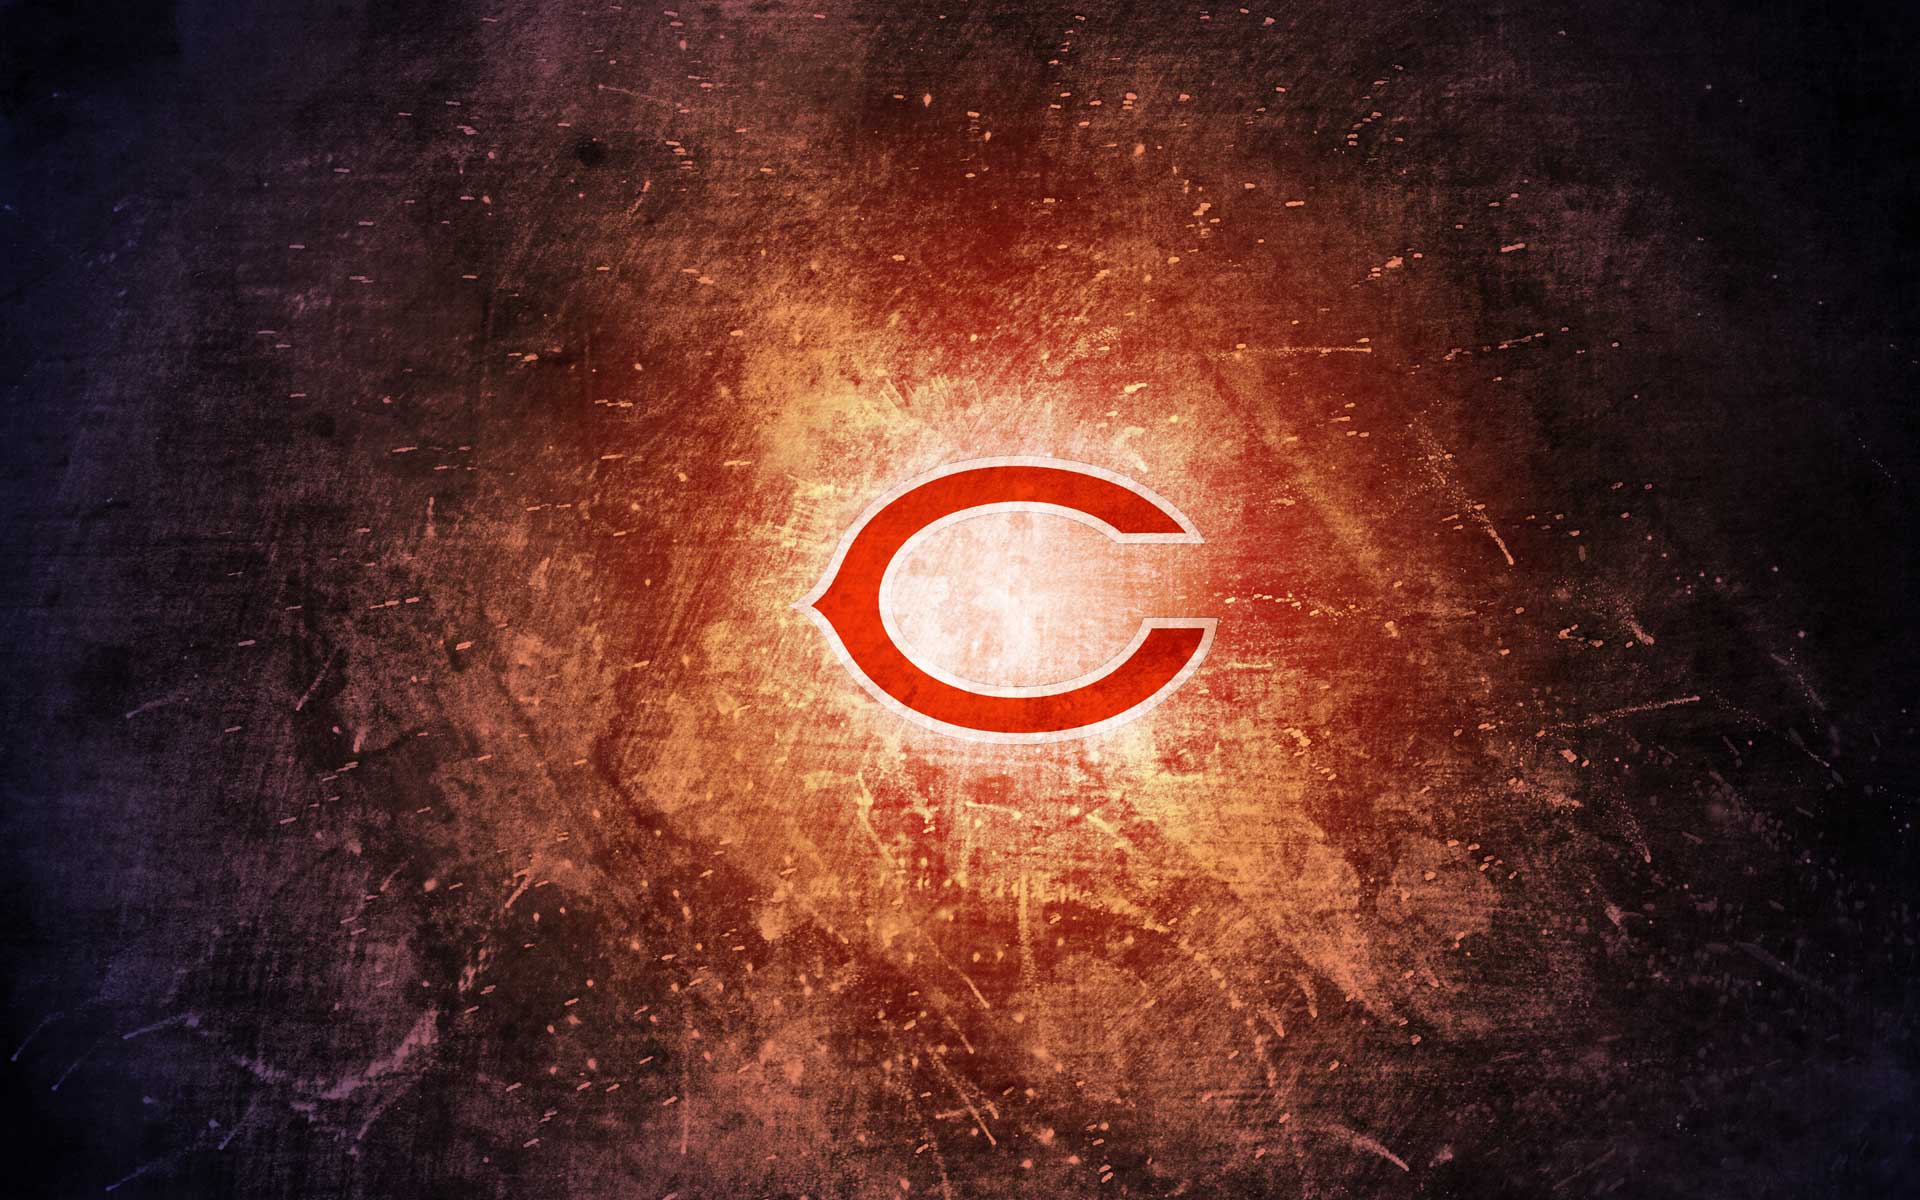 Free HD Chicago Bears Wallpaper. Wallpaper, Background, Image